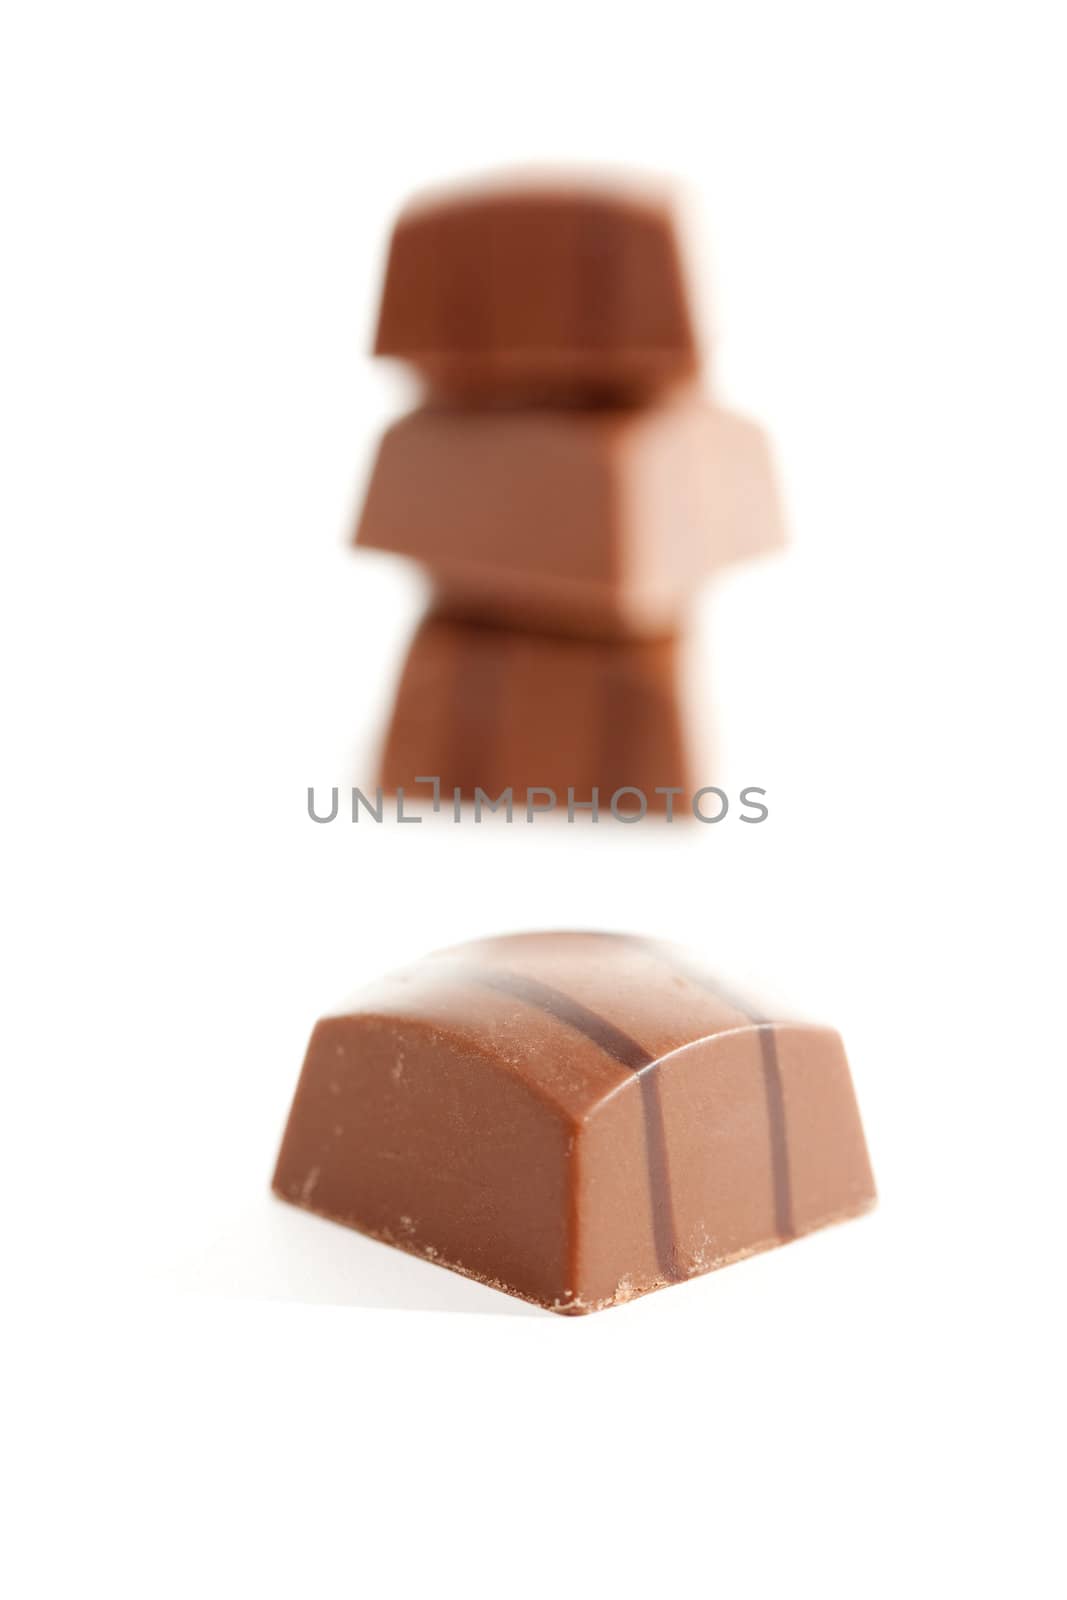 Delicious Chocolates Isolated on a White Background.
